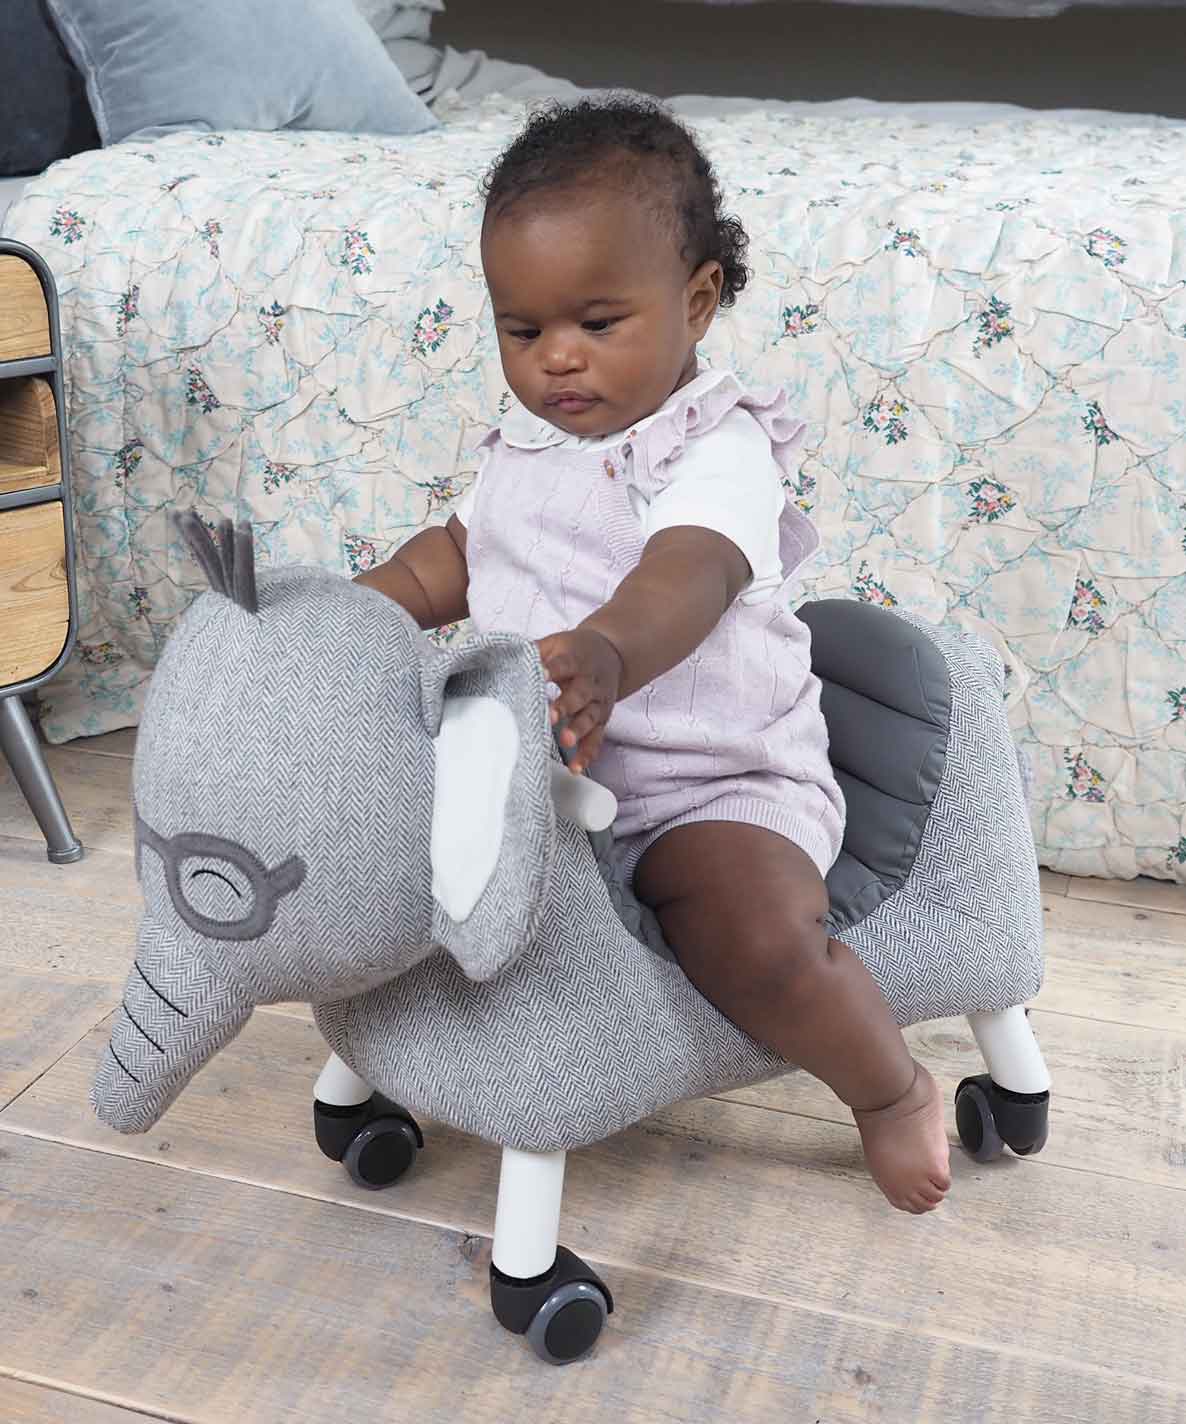 Cuthbert Elephant Ride On Toy